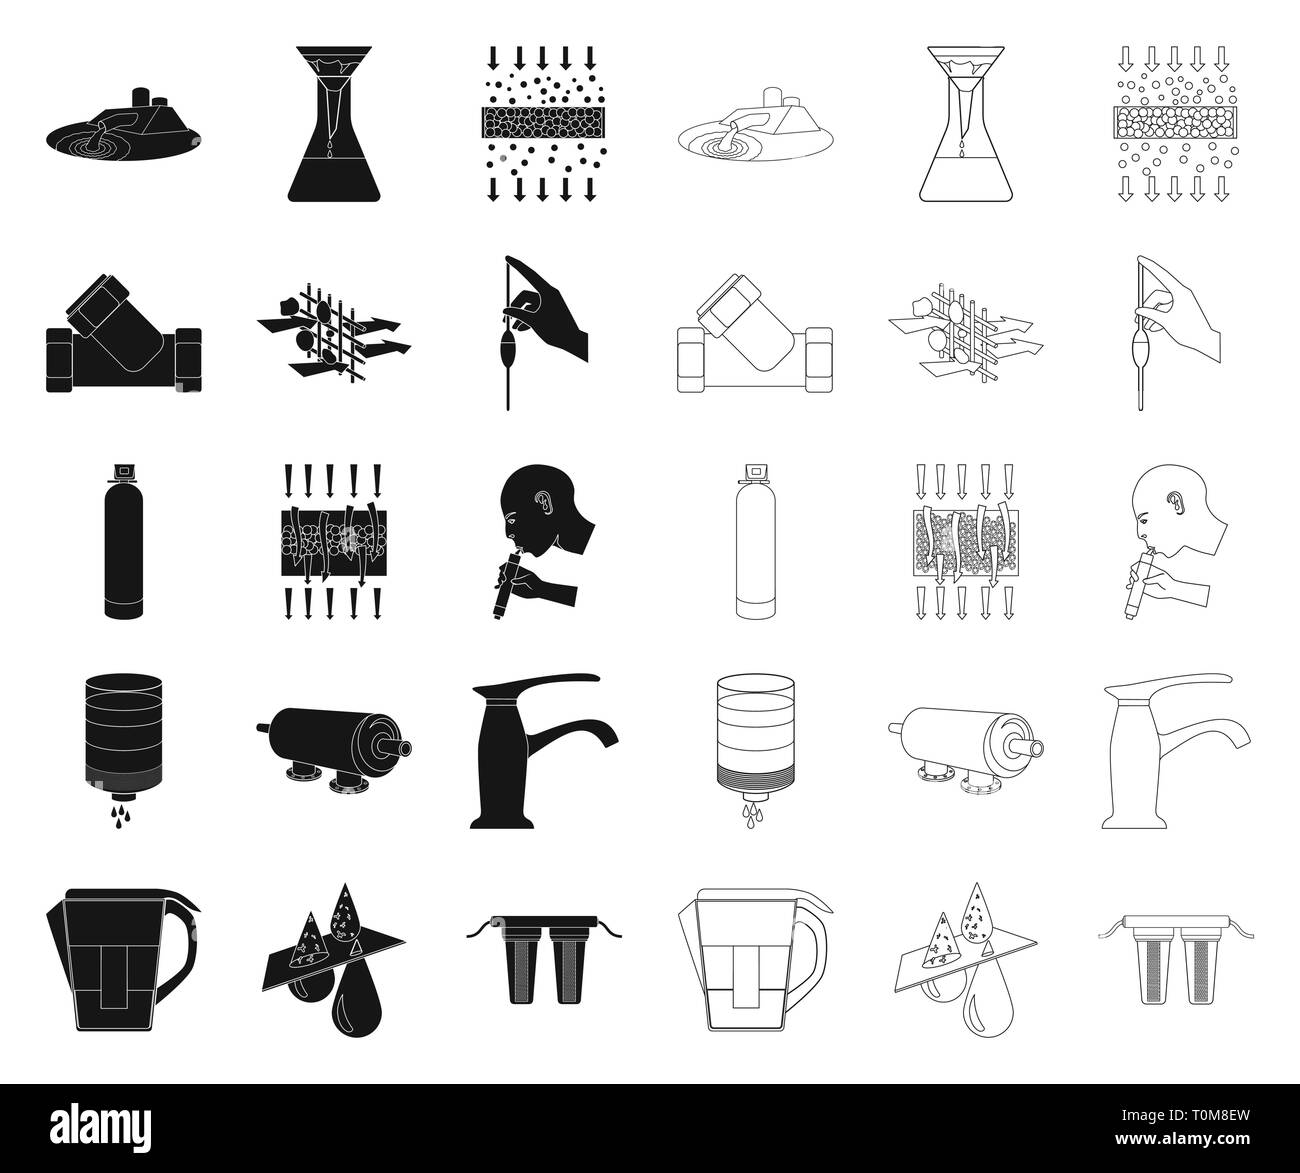 art,black,outline,bulb,carbonic,cartridge,cleaning,collection,compact,conical,contamination,design,drink,equipment,faucet,filler,filling,filter,filters,filtration,fitting,fixture,flask,icon,illustration,impurity,isolated,jug,liquid,logo,machine,man,pipette,plant,plumbing,set,sign,solution,symbol,system,tee,through,treatment,vector,water,web Vector Vectors , Stock Vector